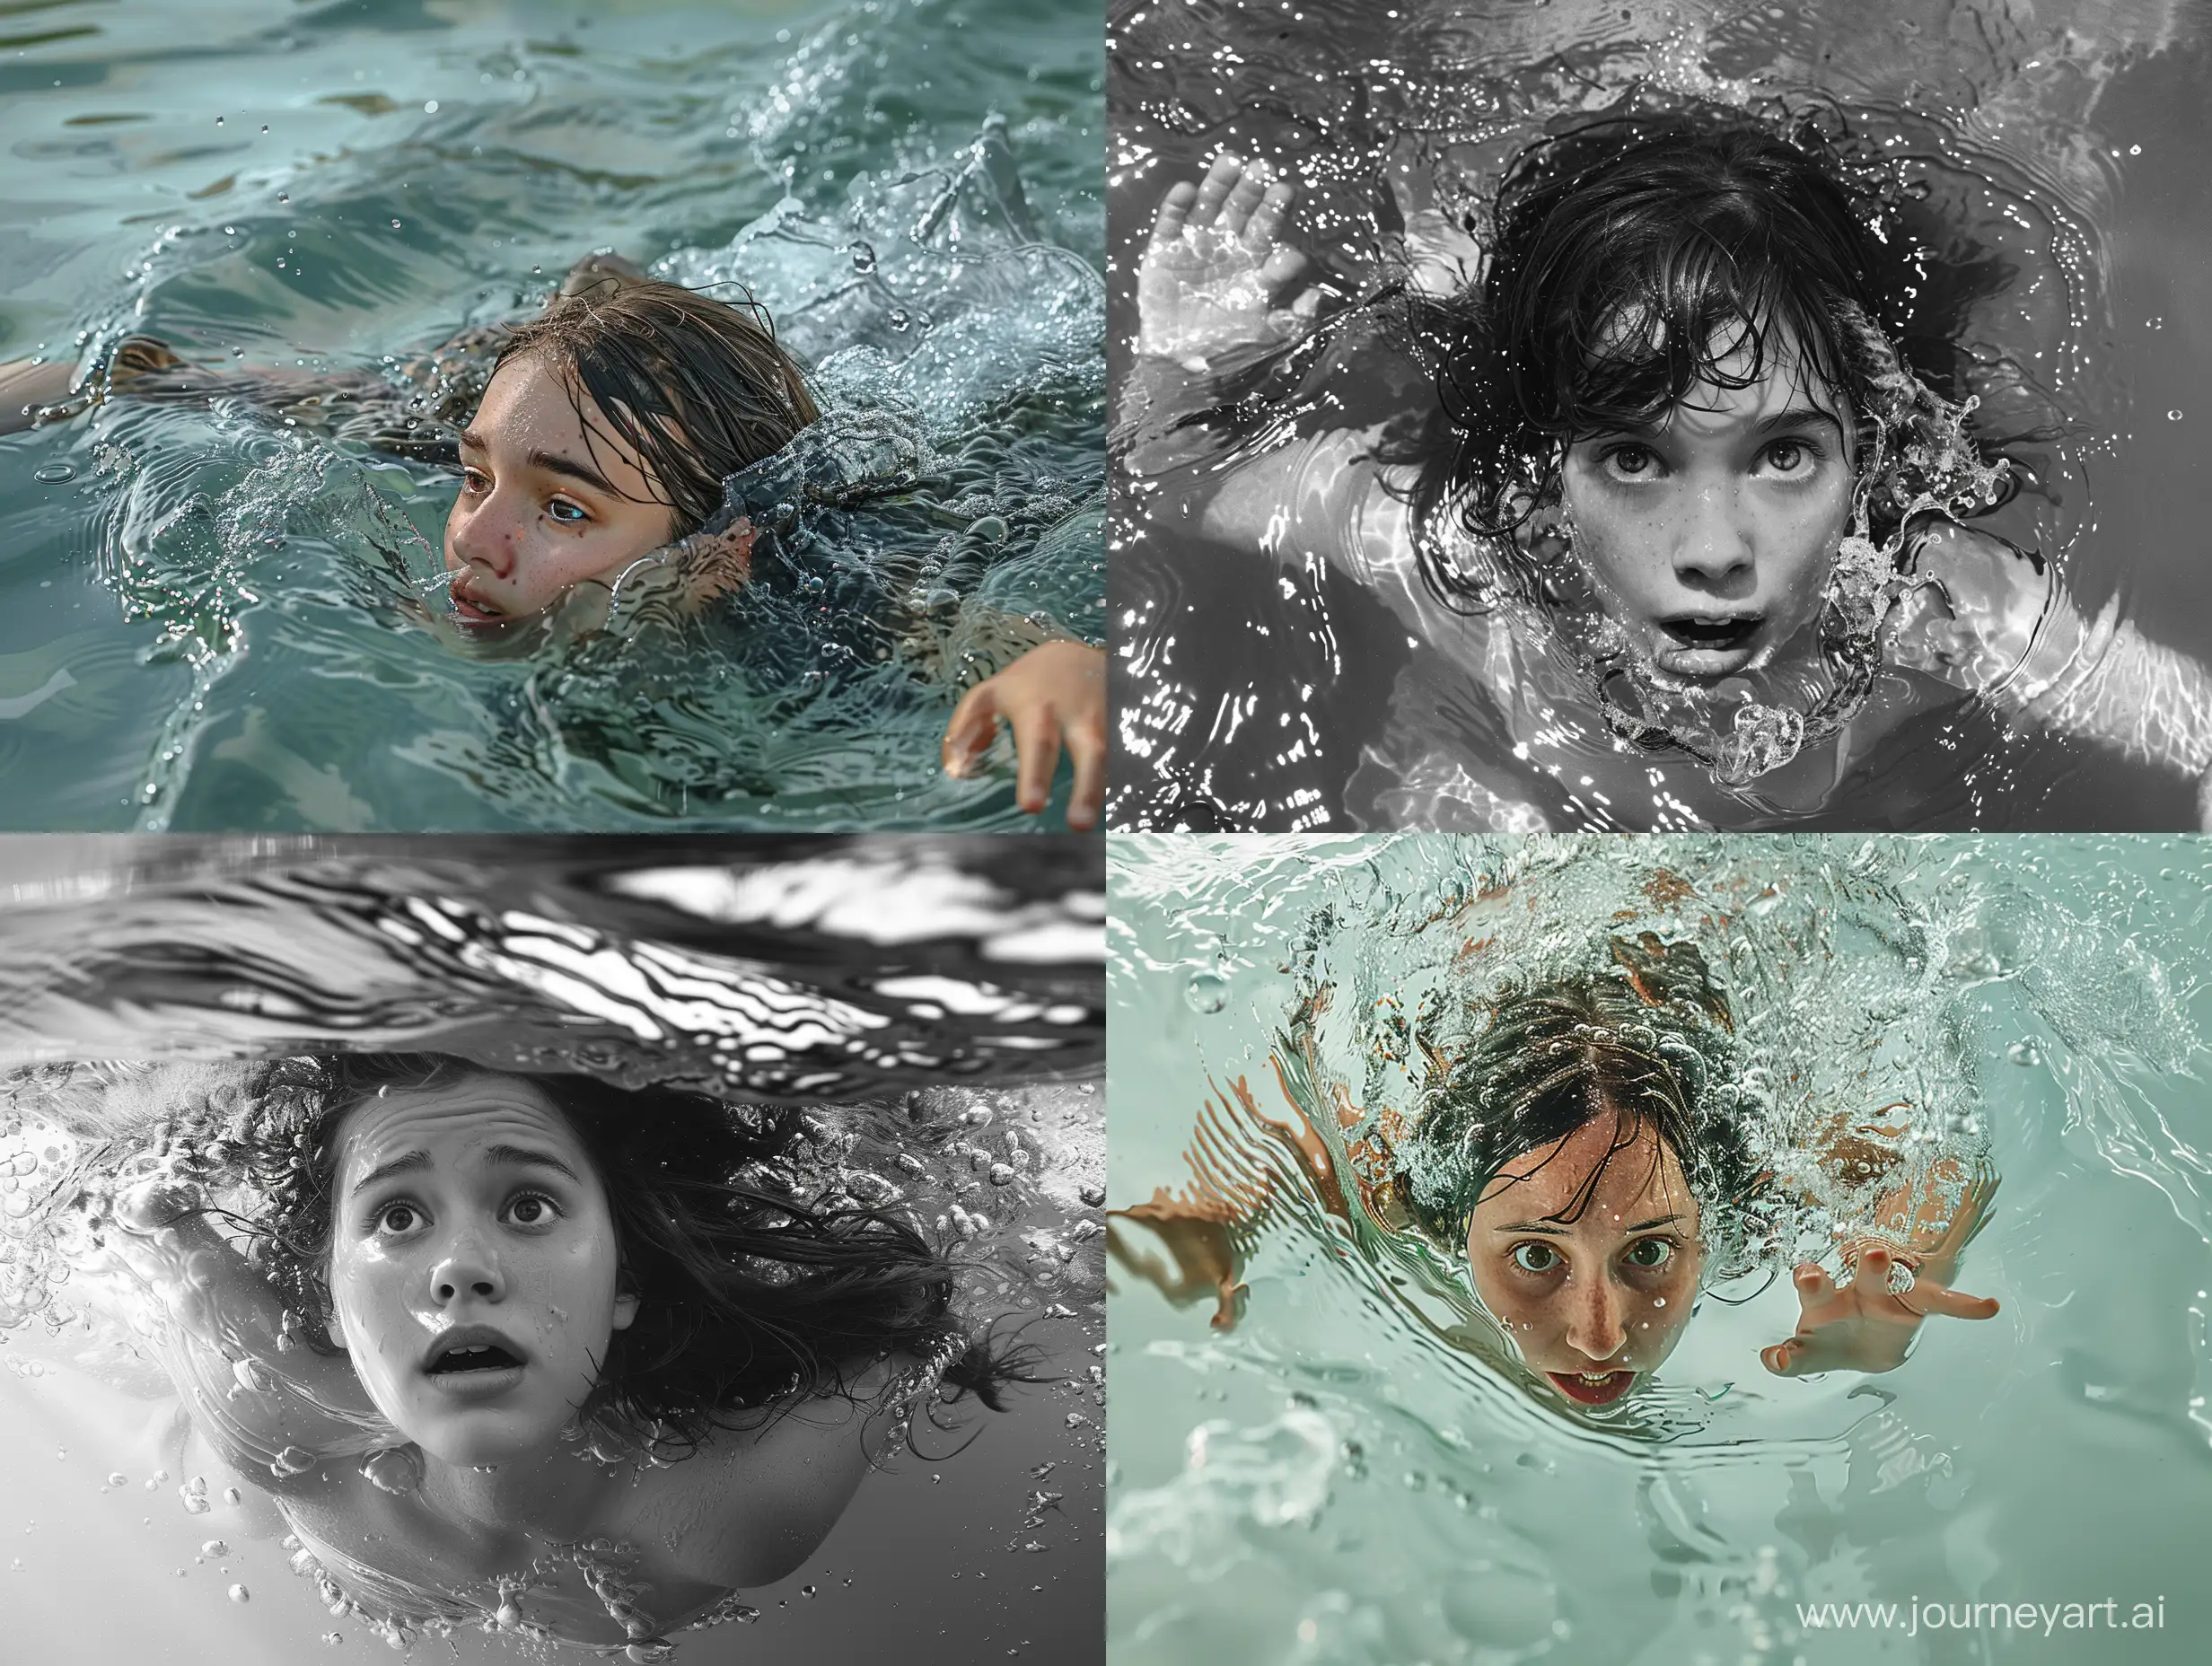 Realistic, personality: [Show the young woman's frantic swim towards the surface, struggling for air. Capture the desperation and urgency in her movements, as she pushes herself to escape the approaching threat. The water should be depicted as murky and disorienting, reflecting her fear and the imminent danger